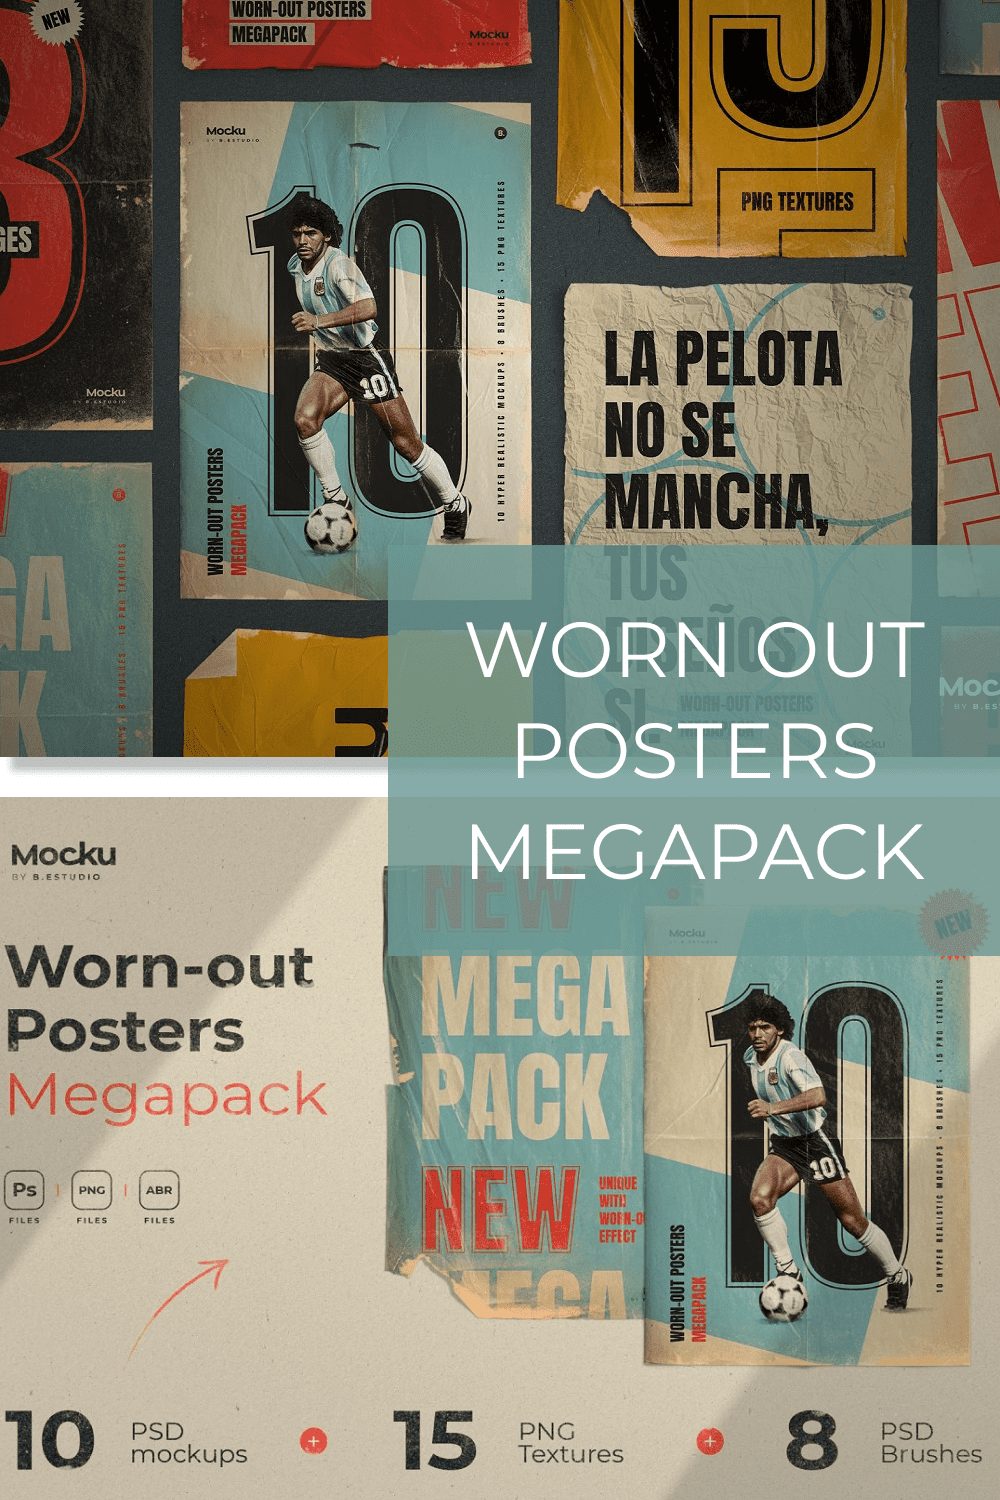 Worn out Posters Megapack pinterest image.